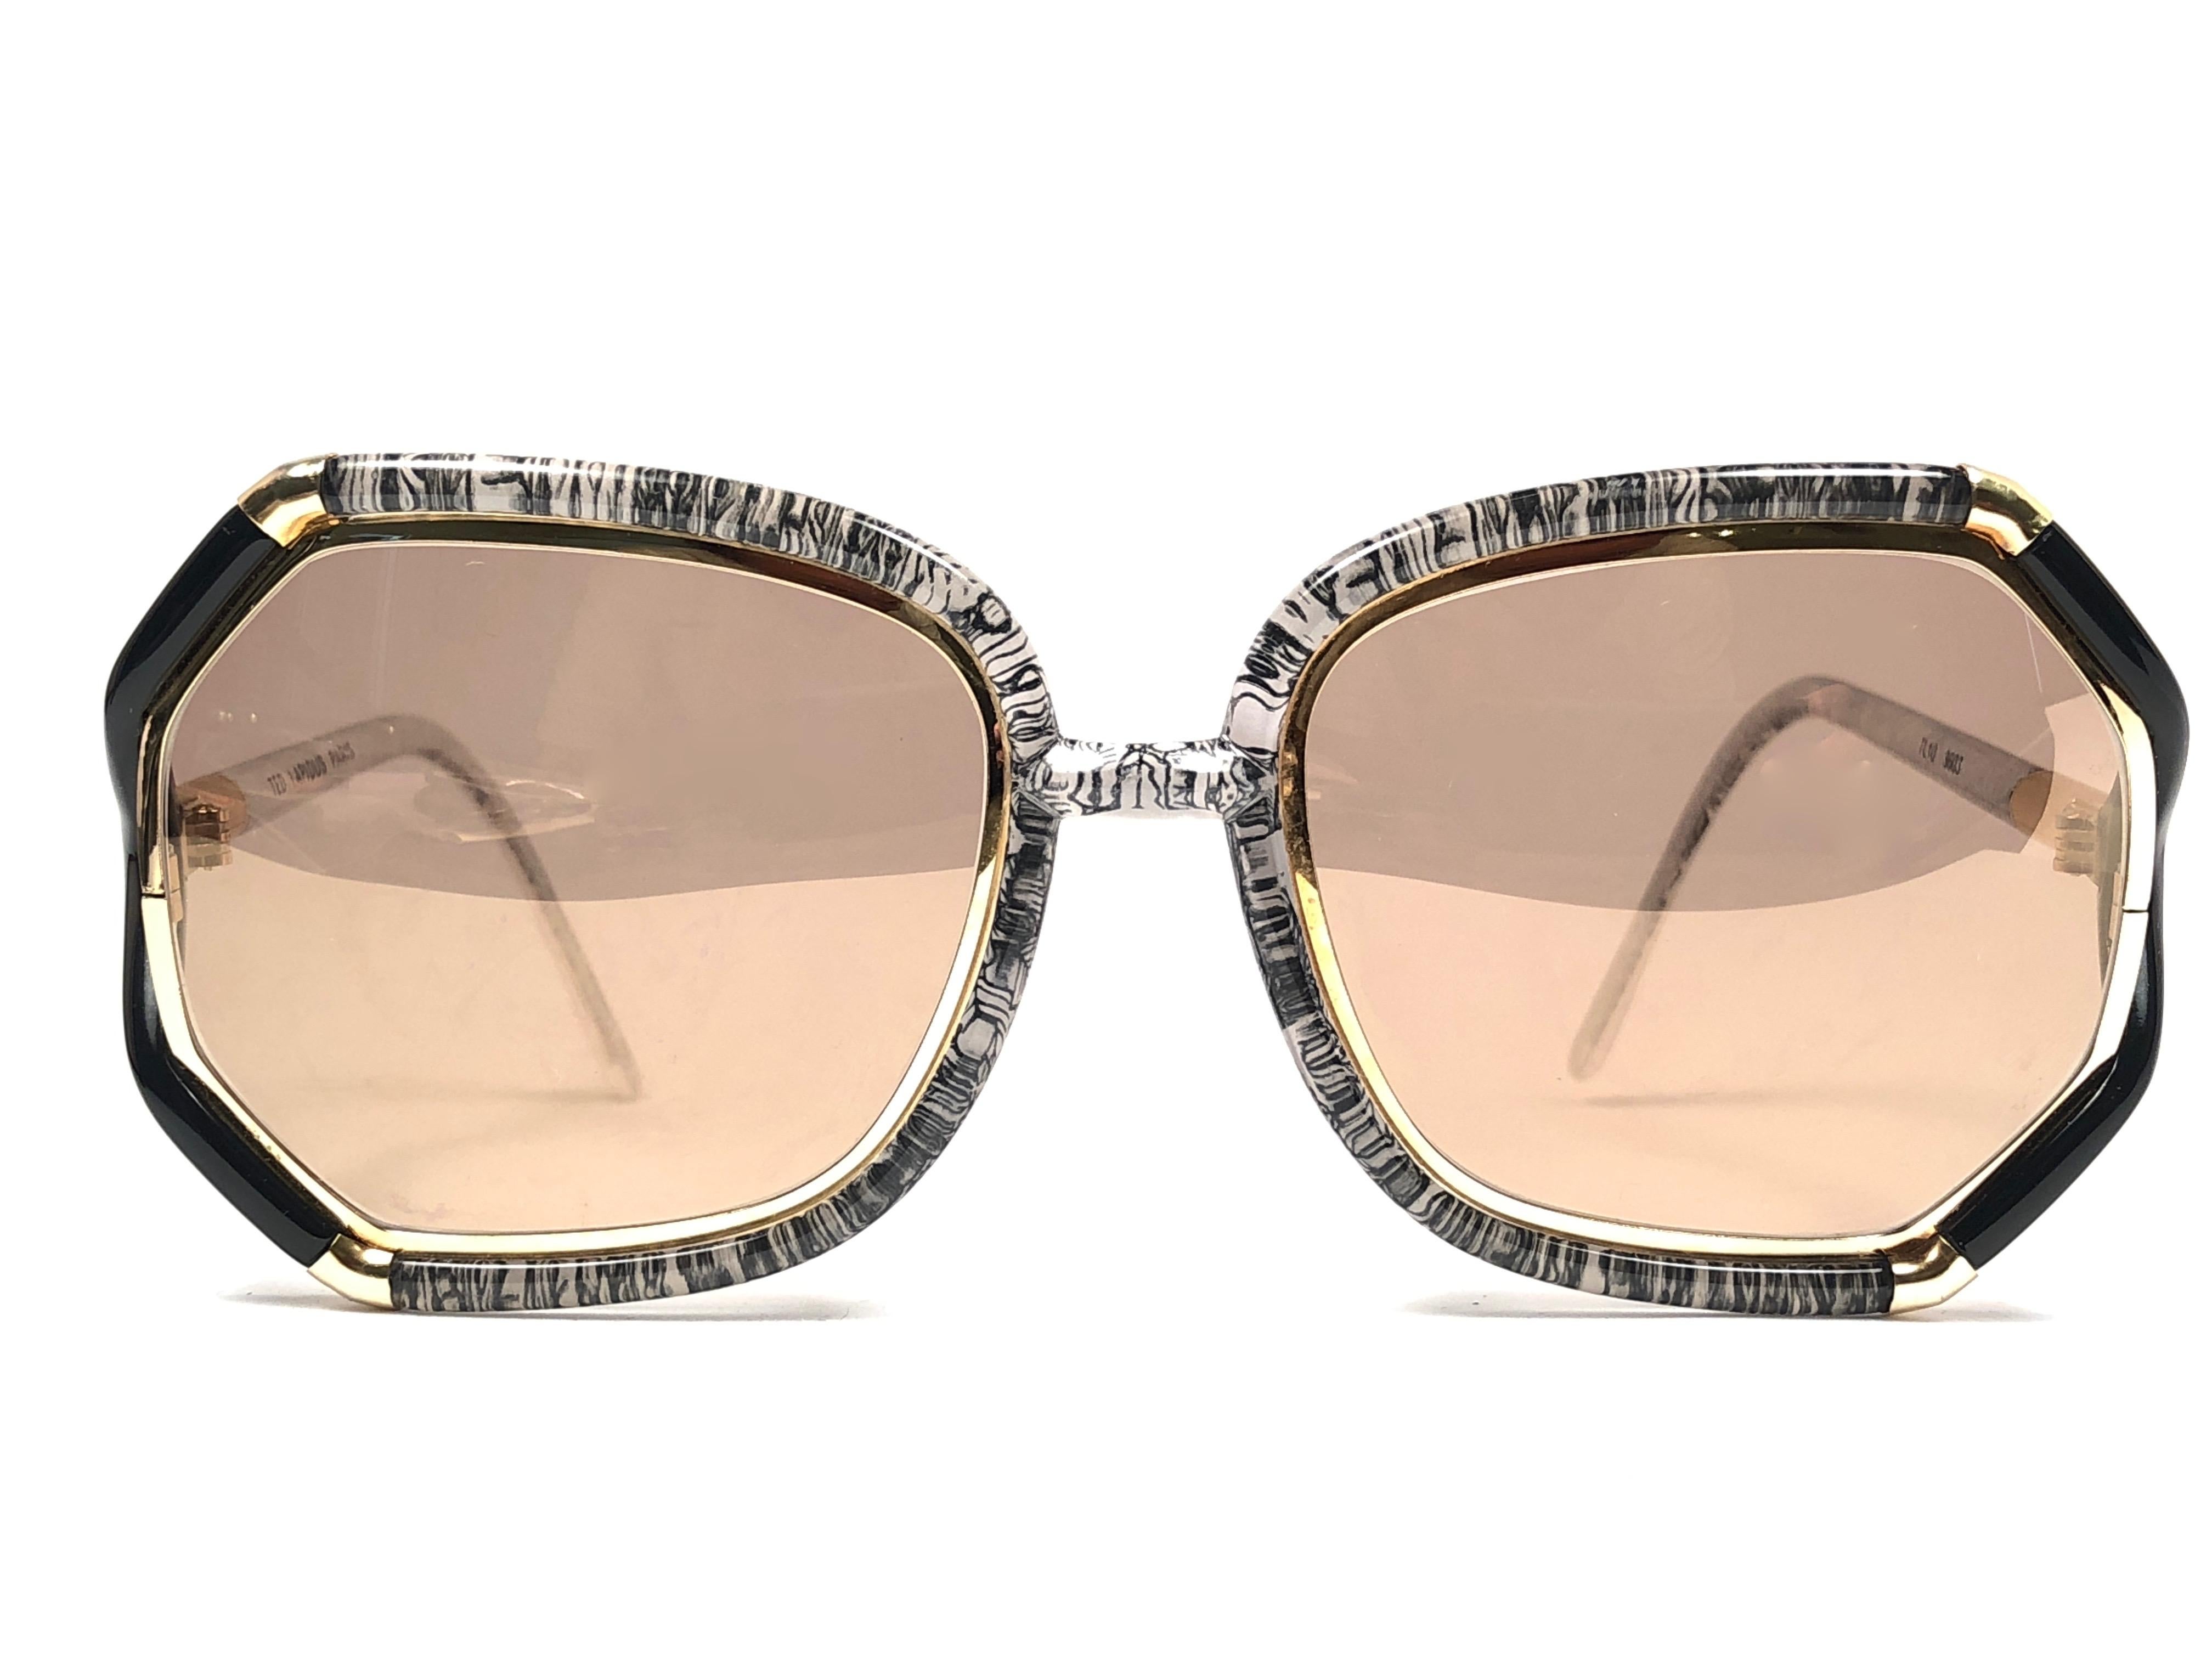 New Vintage Ted Lapidus translucent black & gold frame with spotless lenses.  
Made in Paris.  
Produced and design in 1970's.  
This pair could show minor sign of wear due to storage.
New, never worn or displayed.